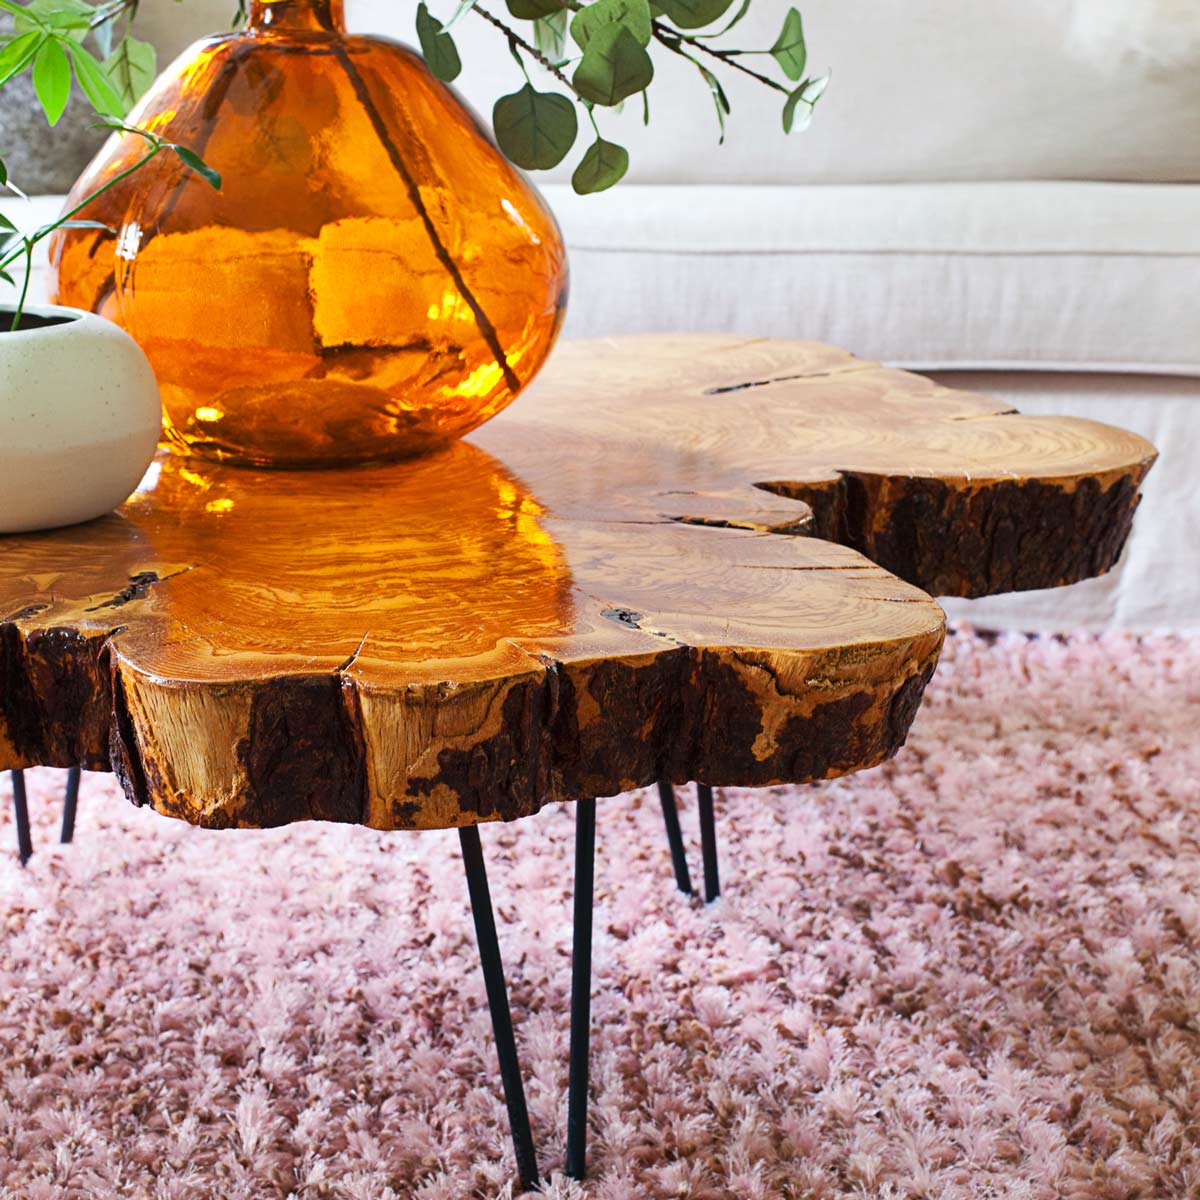 incredible diy end tables simple table ideas the family live edge replacement glass for garden furniture order custom top mirror nest rustic farmhouse side dog cage made wood